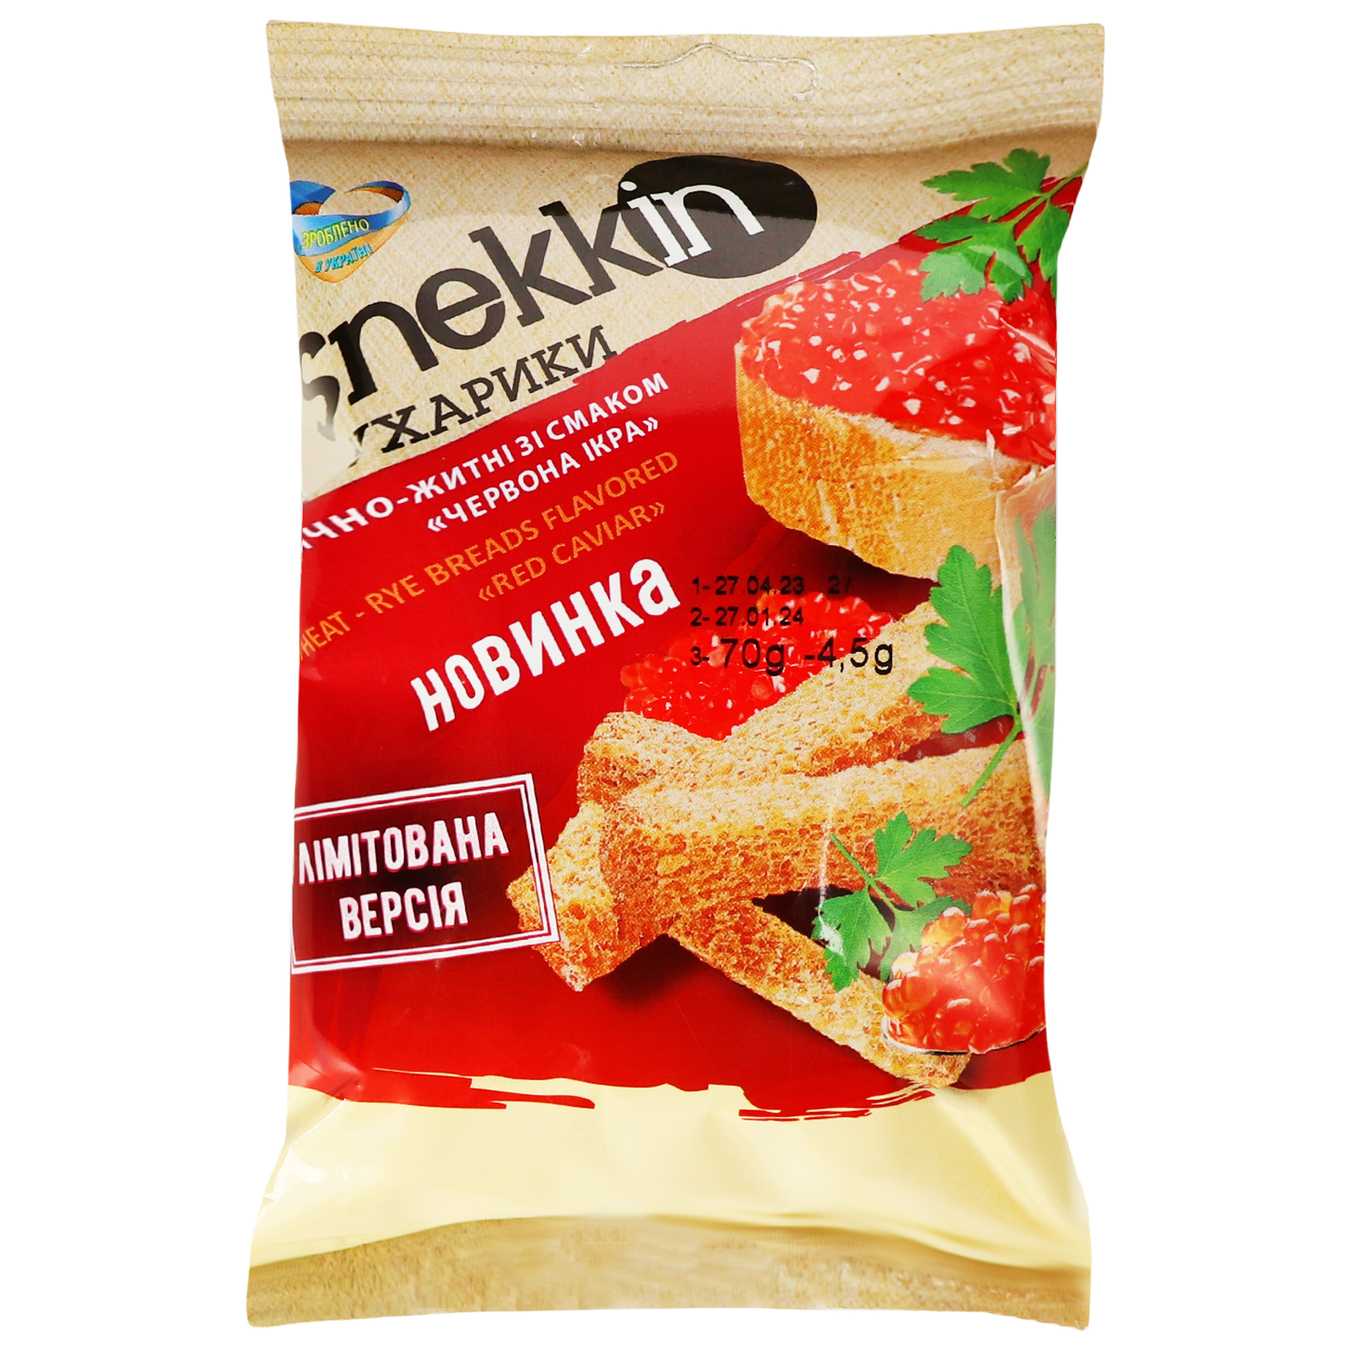 Snekkin wheat-rye crackers with red caviar flavor 70g